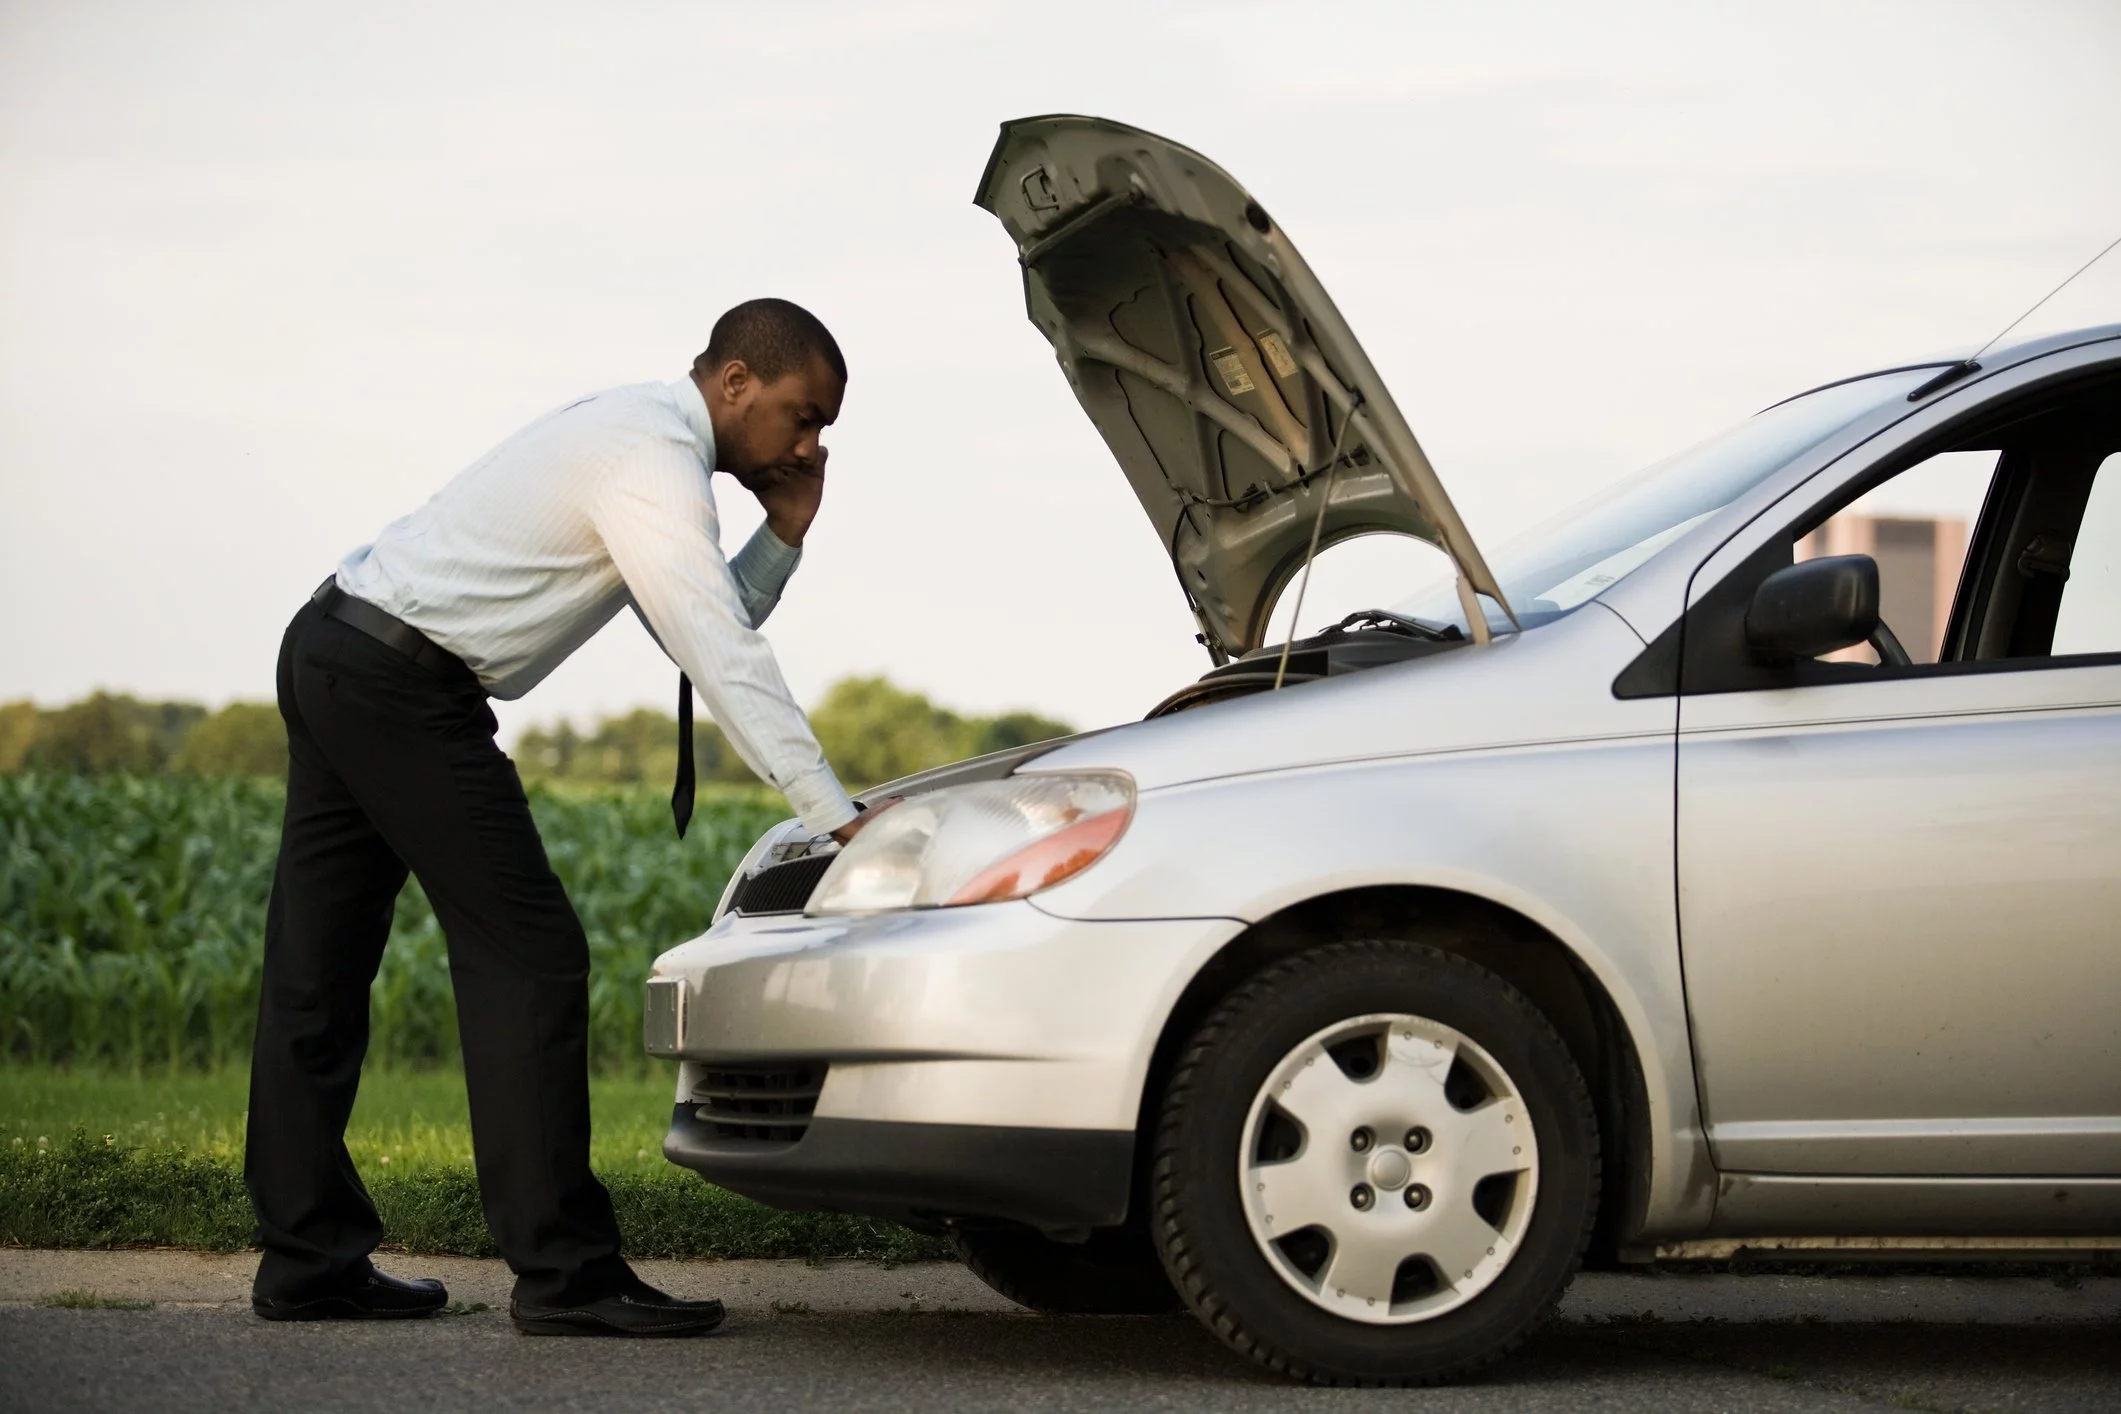 Does Canadian Tire Roadside Assistance Work in the US